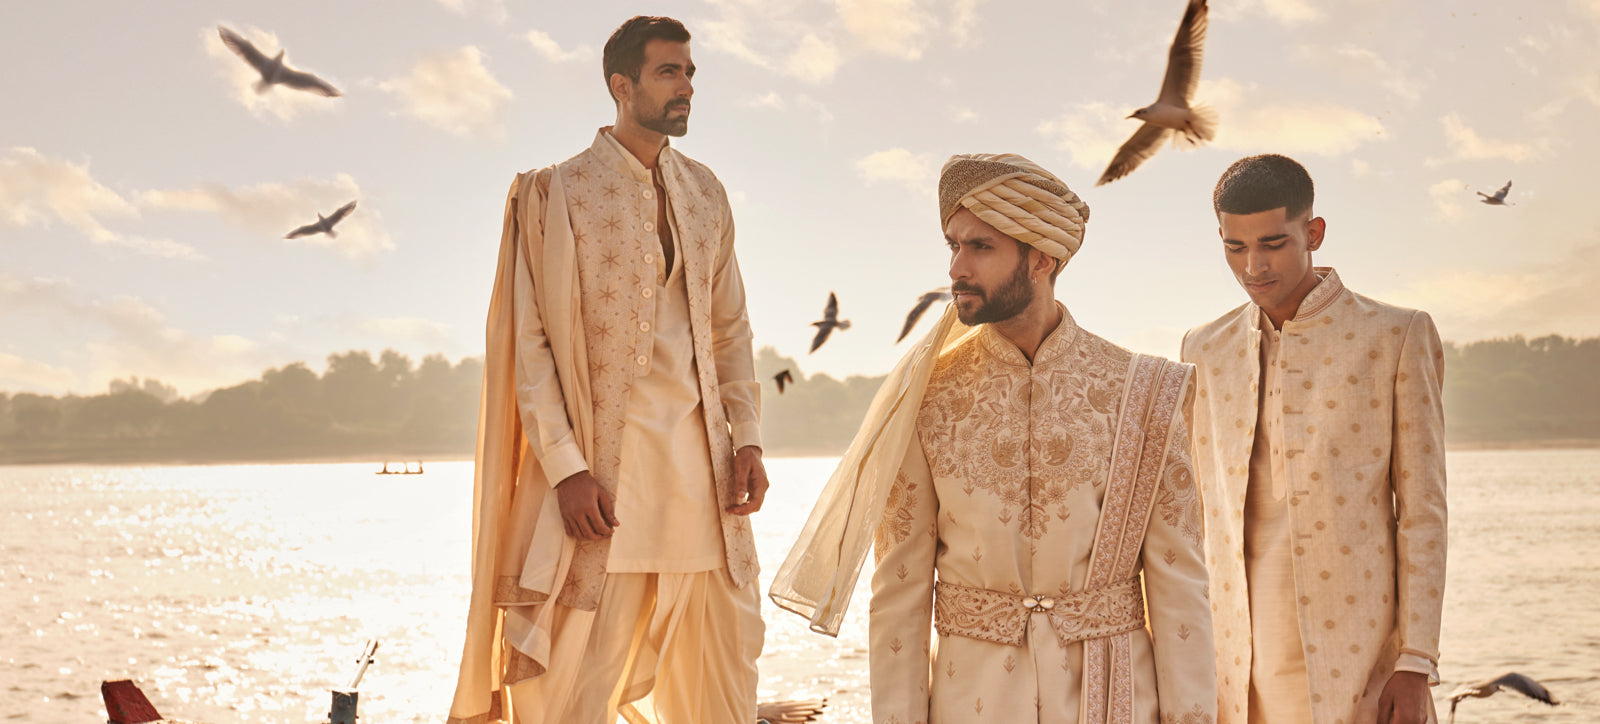 Styling Your Wedding Look: A Guide for the Indian Groom